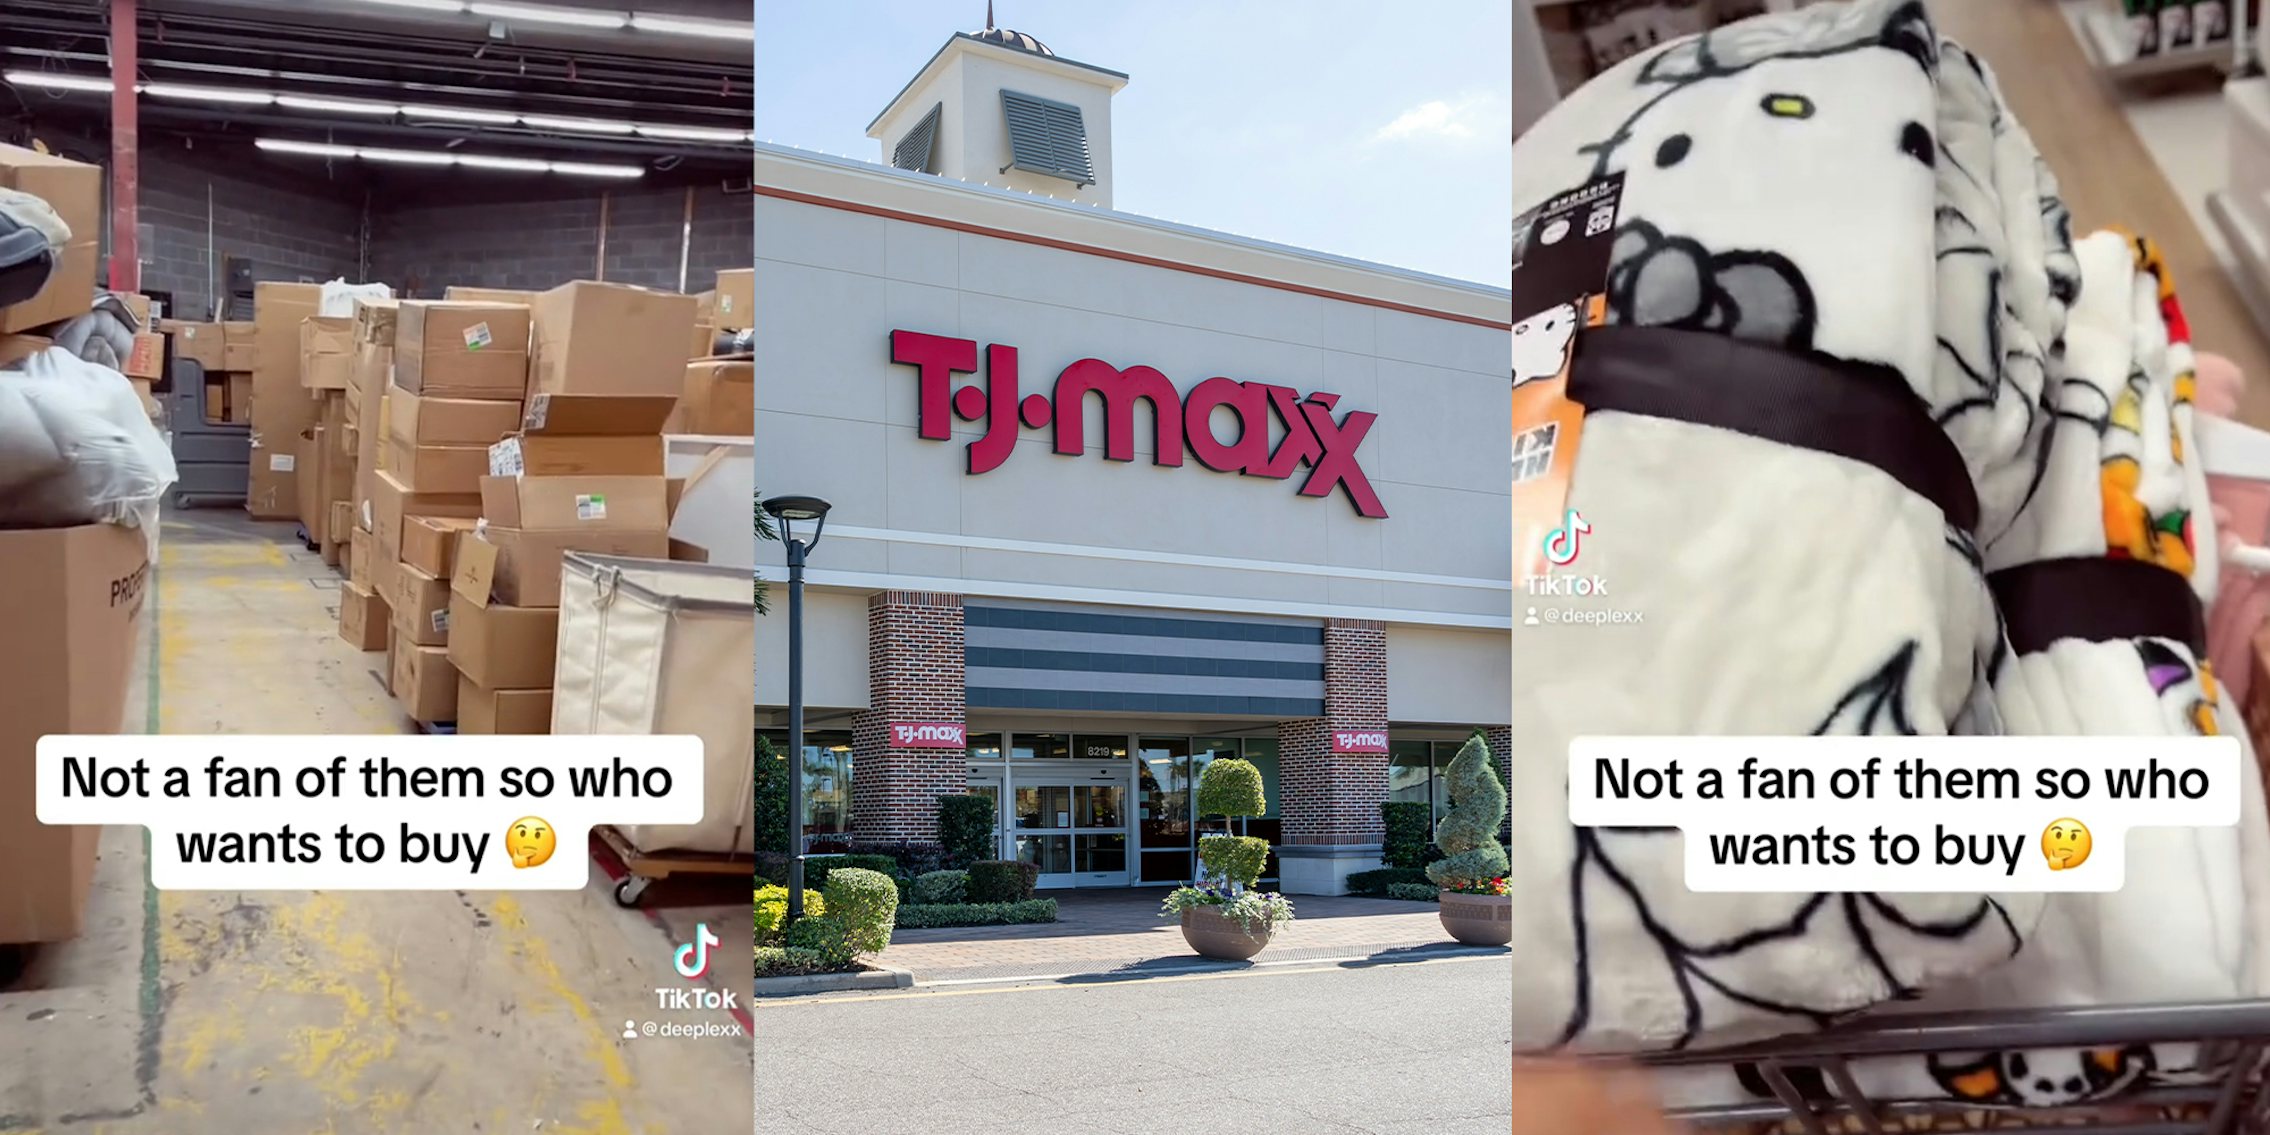 As someone who has worked in 2 separate TJ Maxx stores I can finally say,  f*CK the RUG AISLE : r/TjMaxx